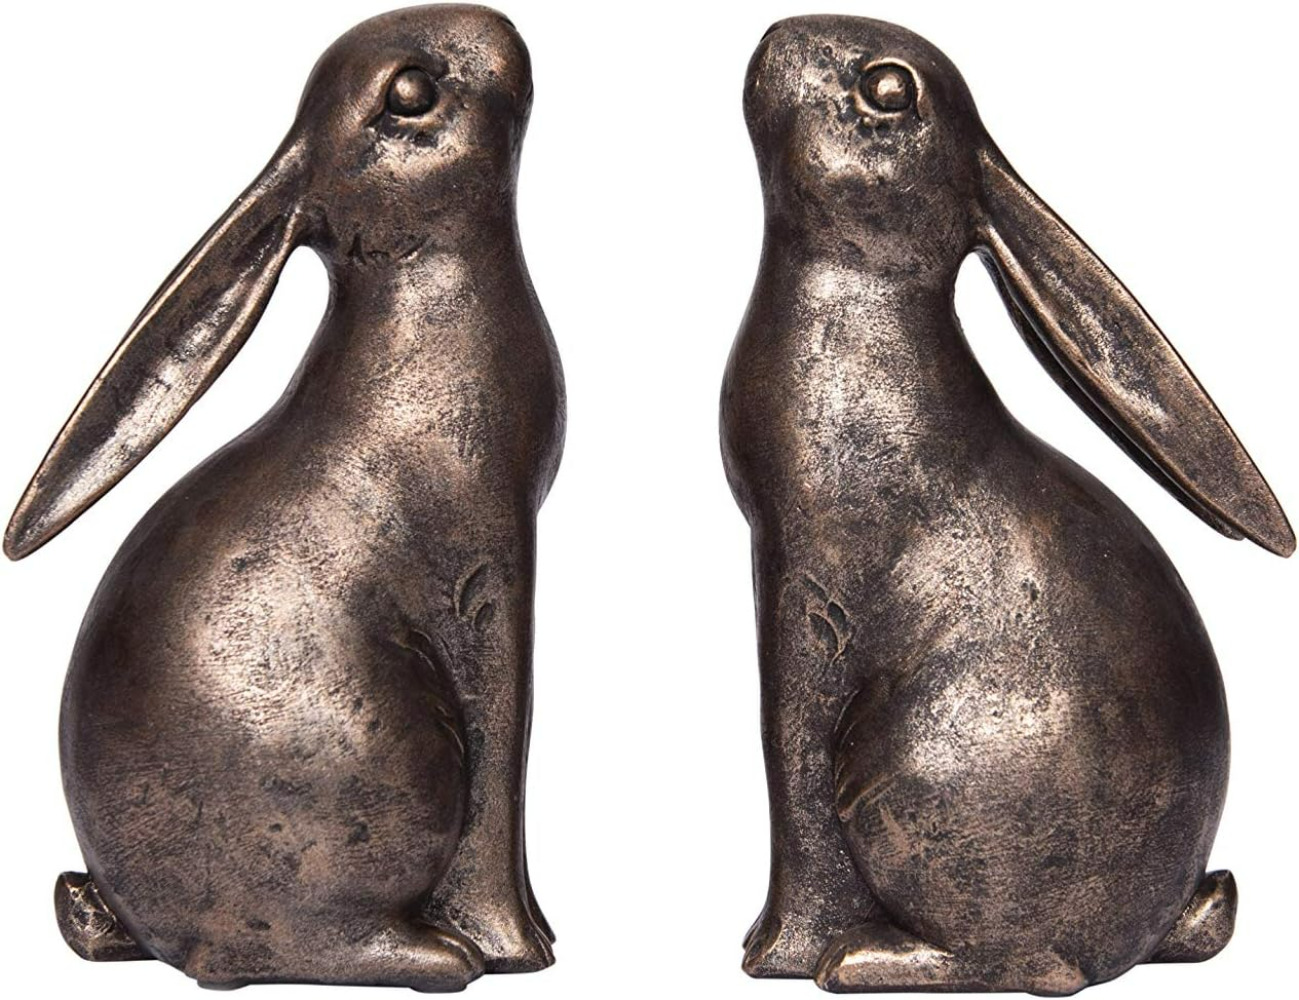 Decorative Resin Rabbit Bookends, Bronze, Set of 2,in The Living Room, Office